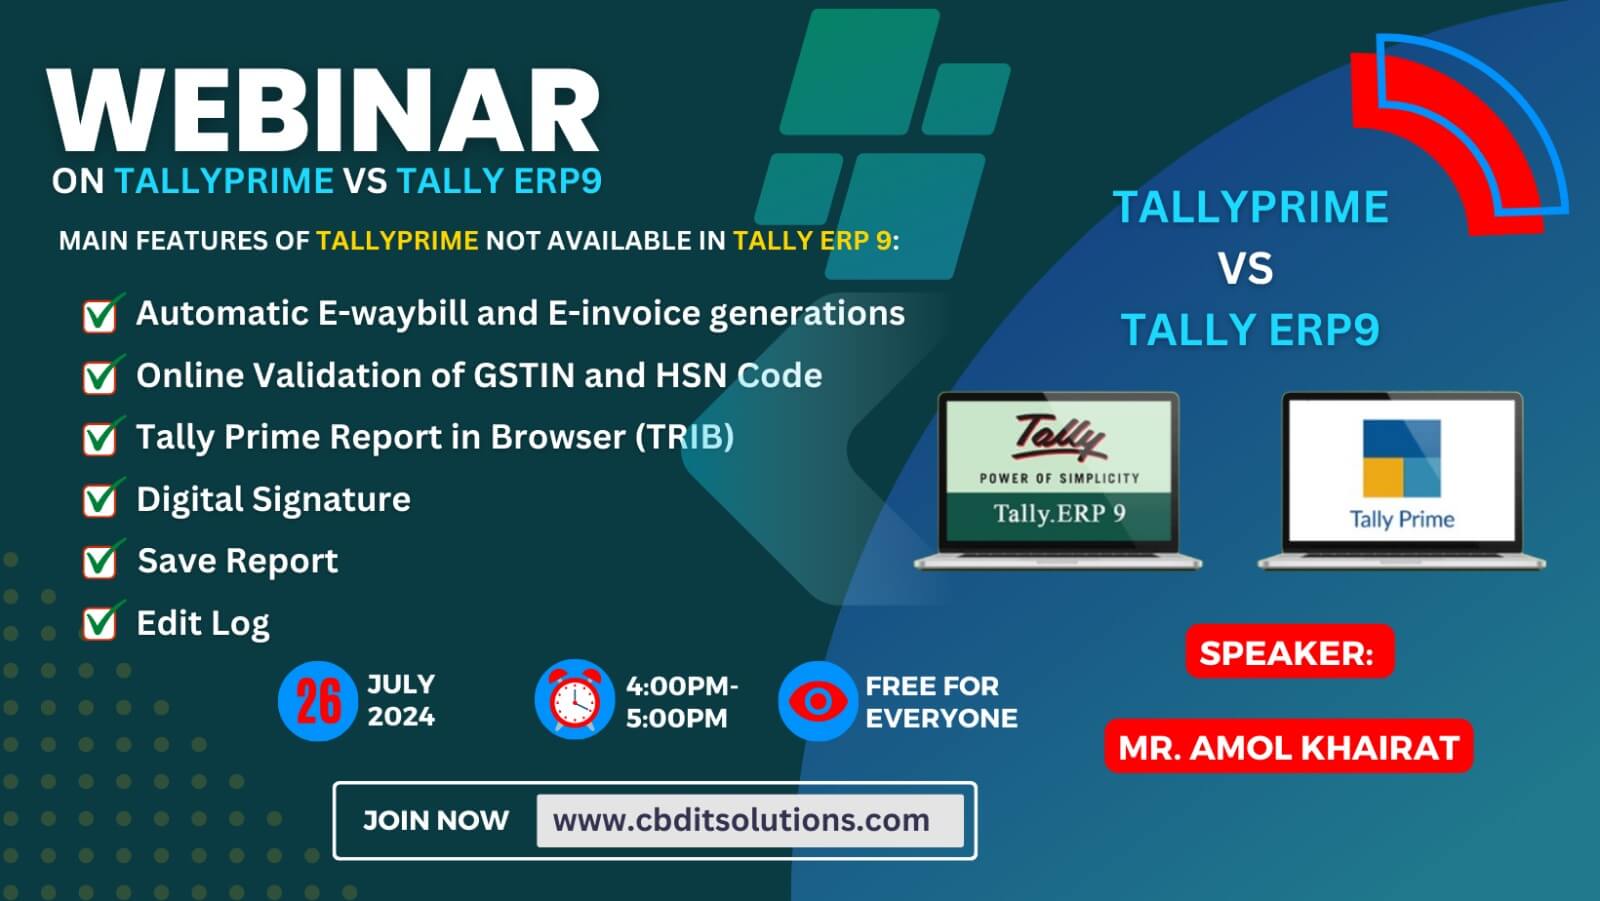 Why TallyPrime instead of Tally ERP 9.0| 26 July 2024 | 4:00 PM